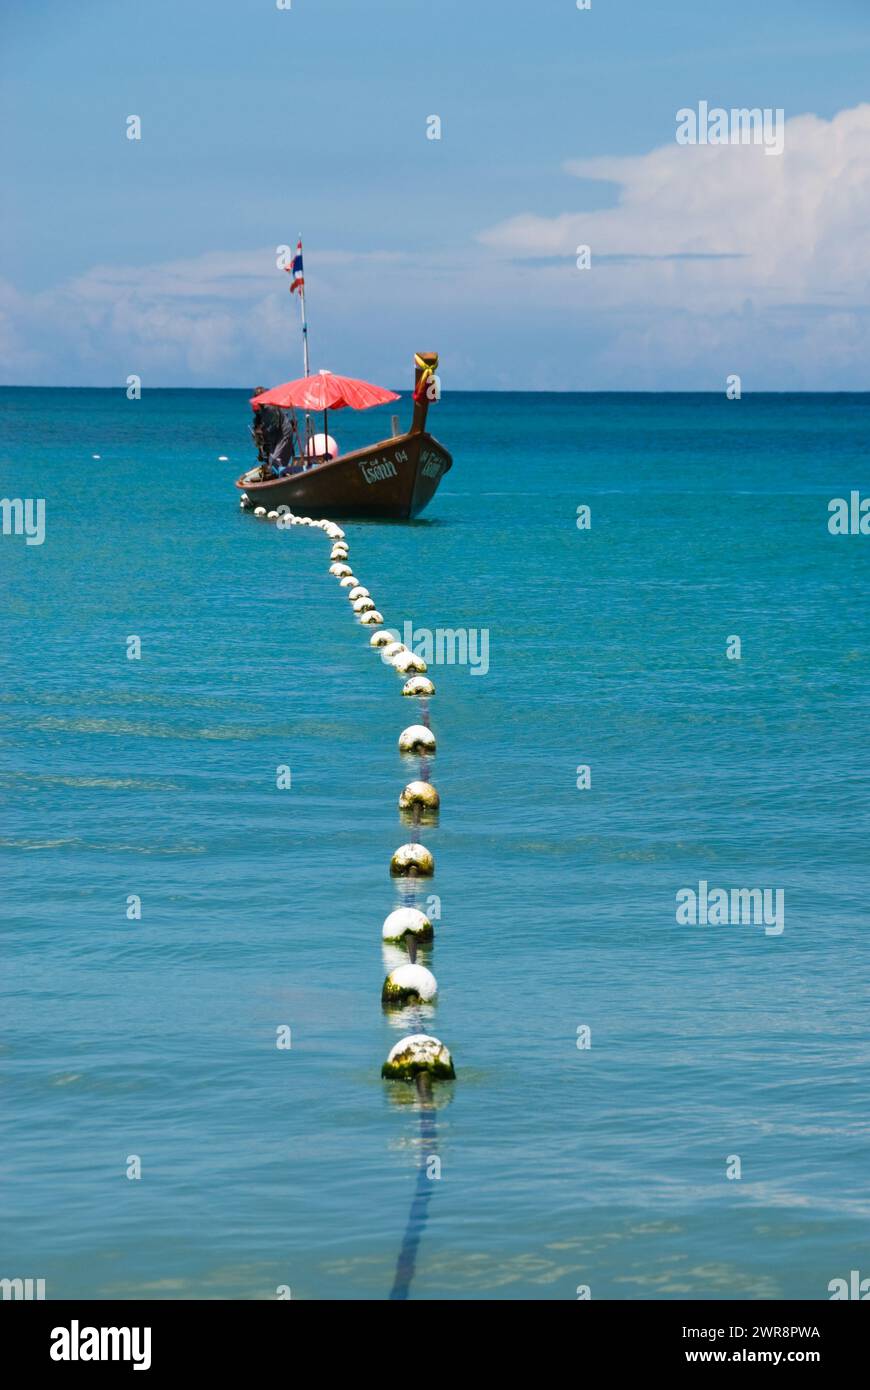 Boat sailing on water with buoy Stock Photo